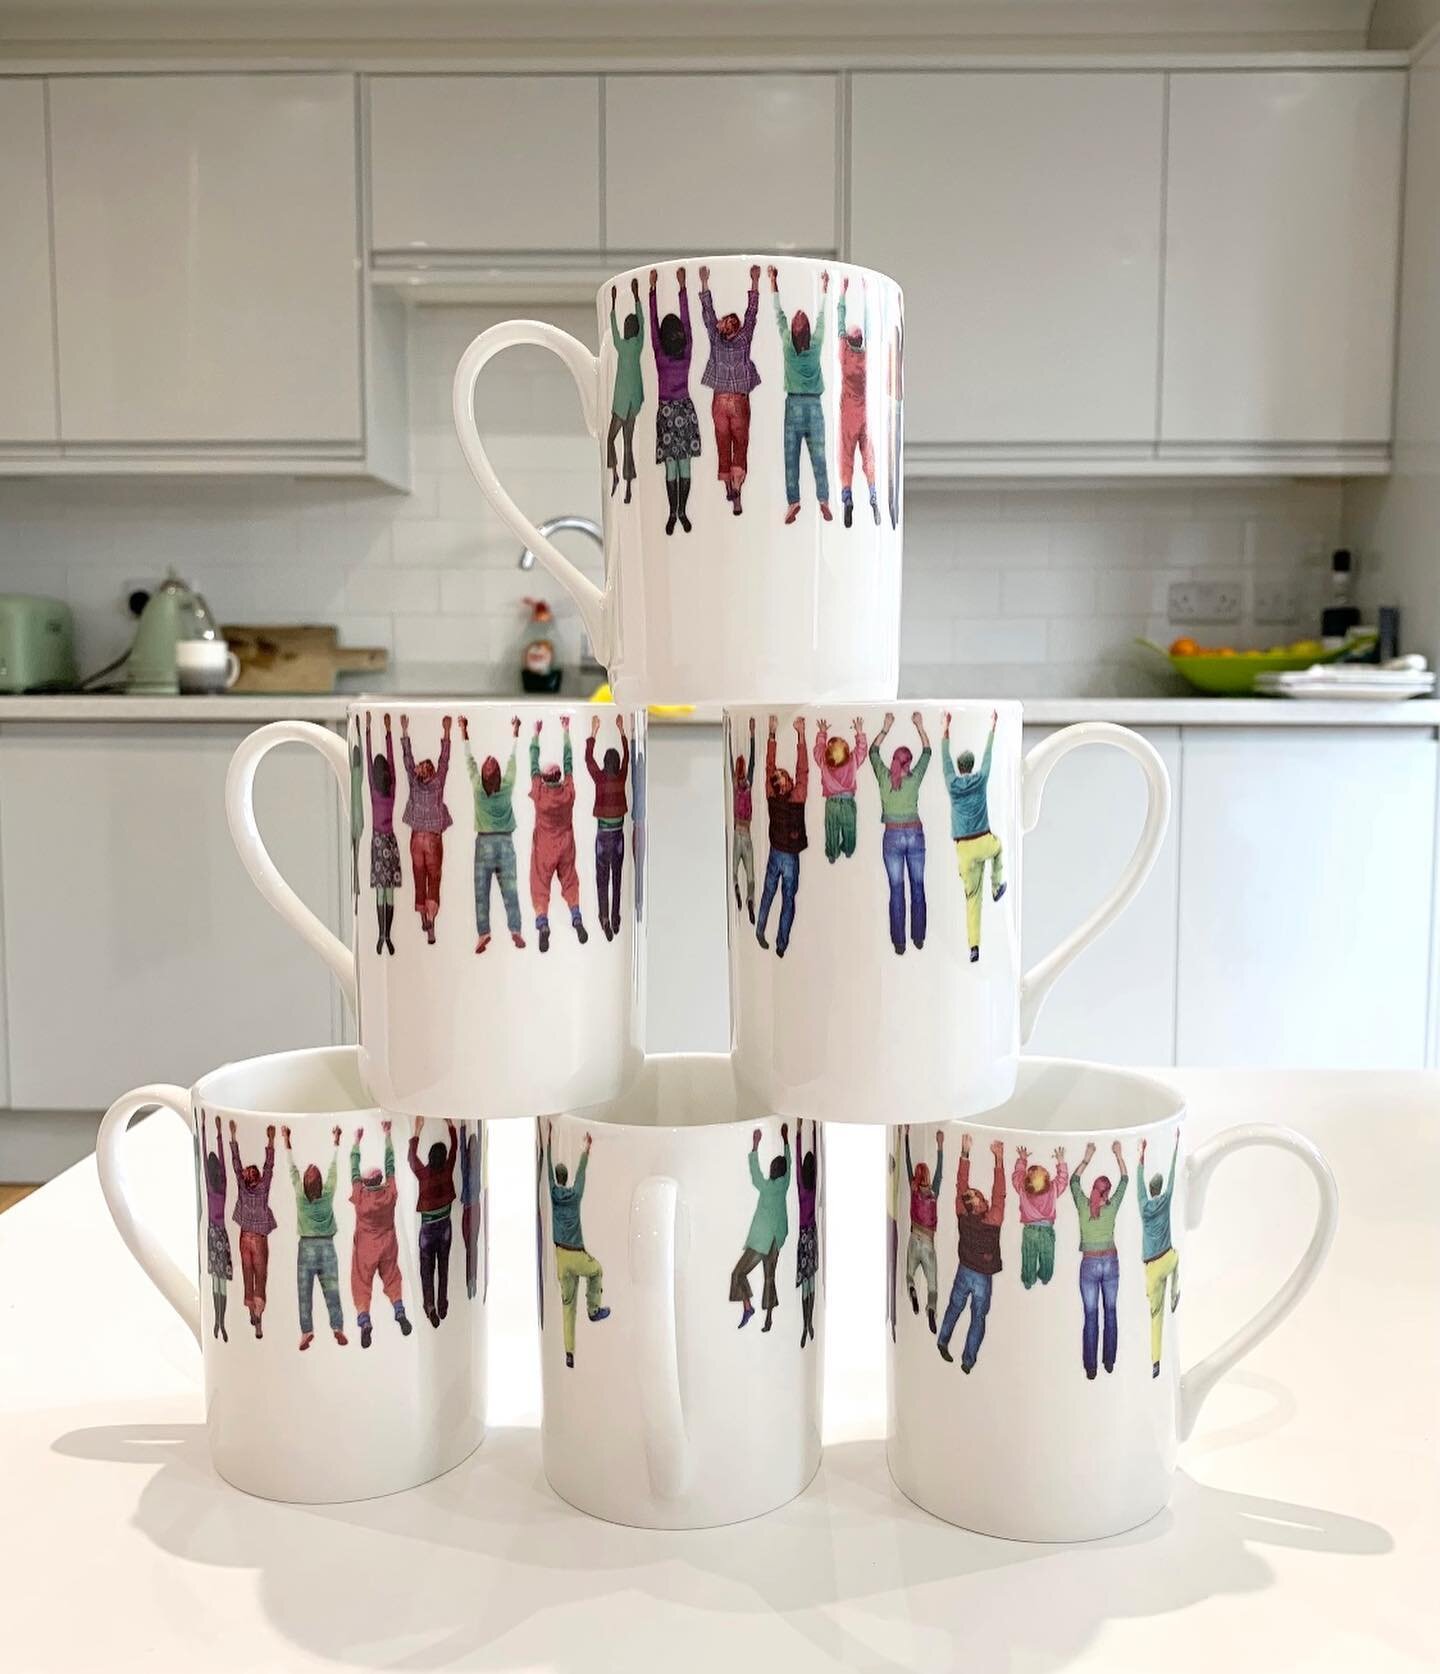 We&rsquo;re all hanging on for dear life!!
Have a look in my Insta shop - under my profile circle-or DM me.
The perfect present for someone you know whose done well through this year ❤️ #lockdowngiftsuk#mugsofinstagram #giftideasforher #giftideasforh